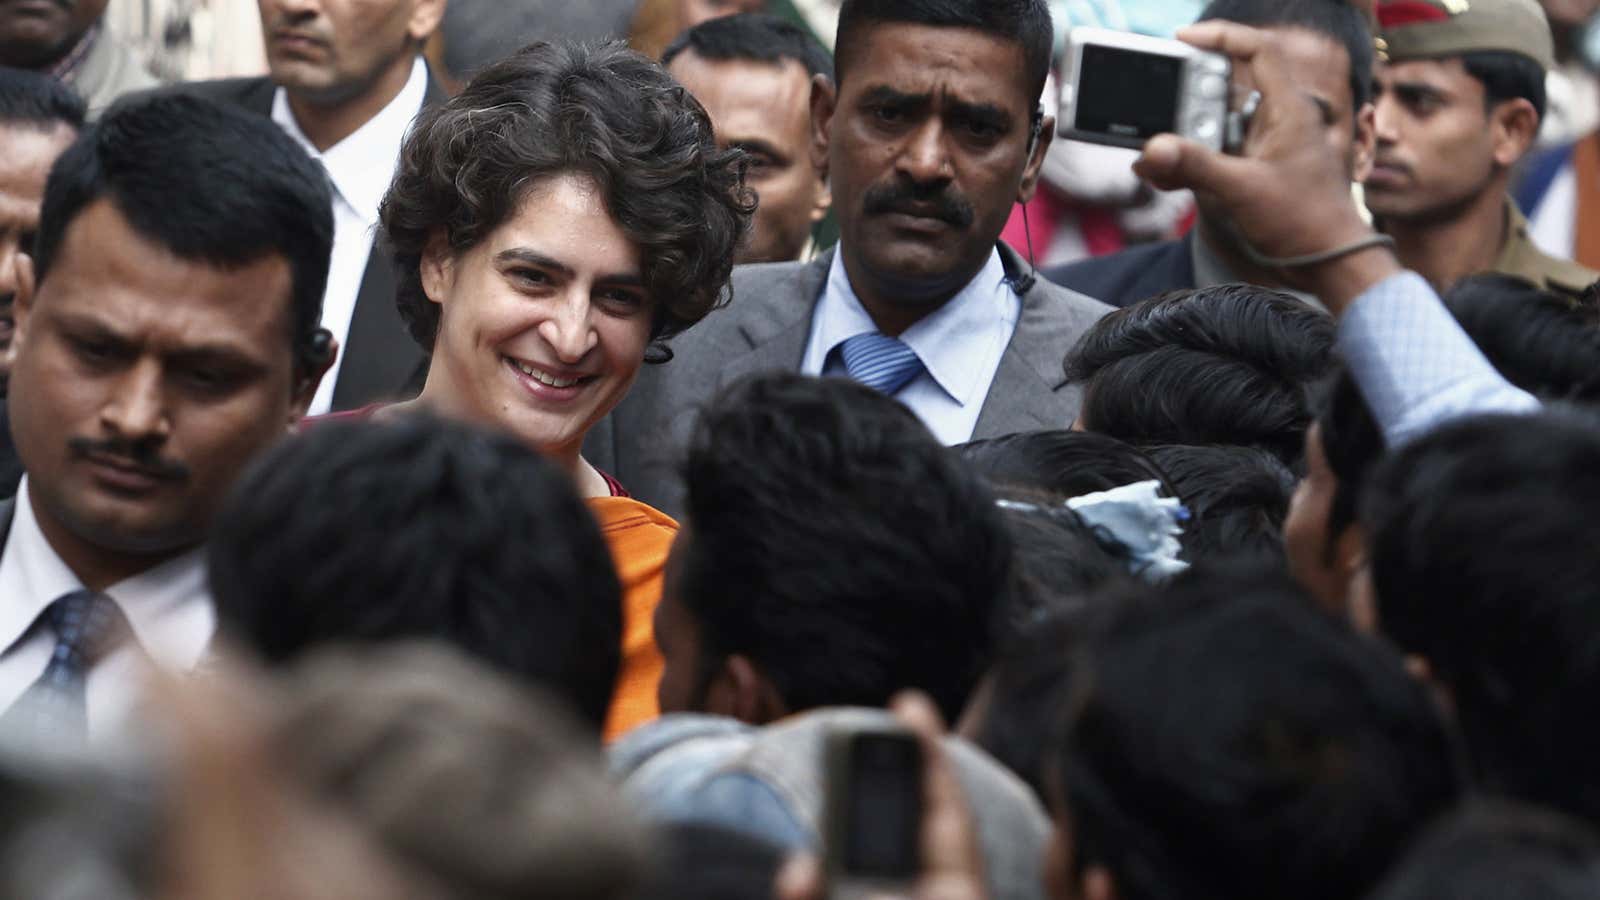 Priyanka Gandhi Vadra attracts attention whether she wants it or not.